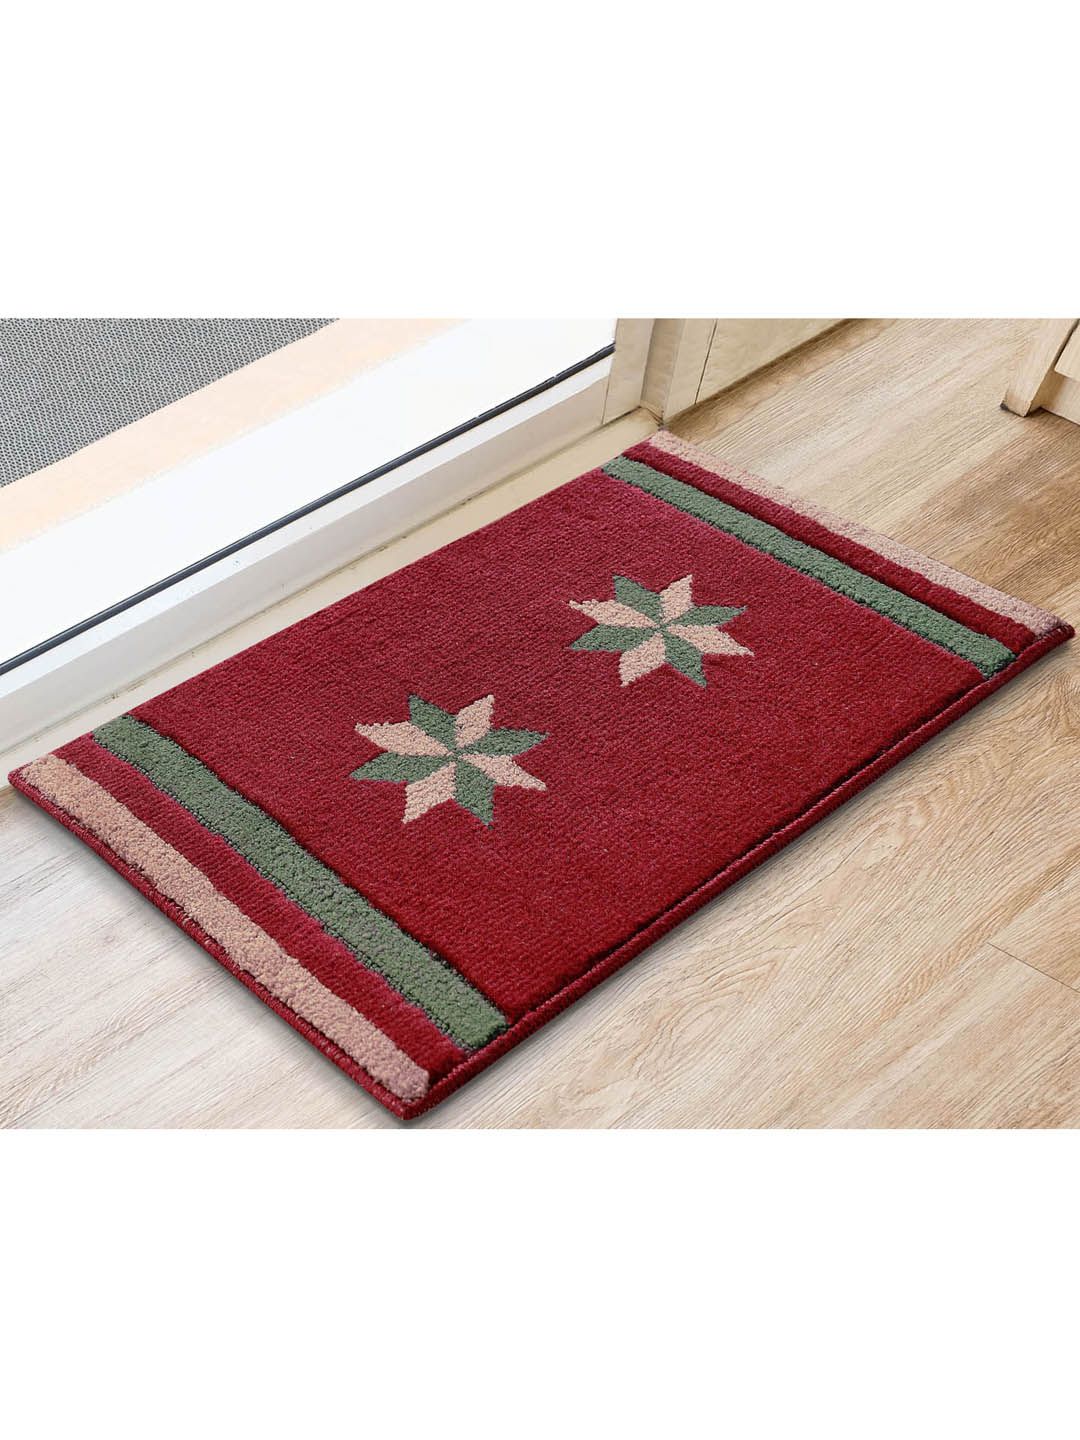 Saral Home Set Of 2 Maroon & Green Printed Anti-Skid Cotton Doormats Price in India